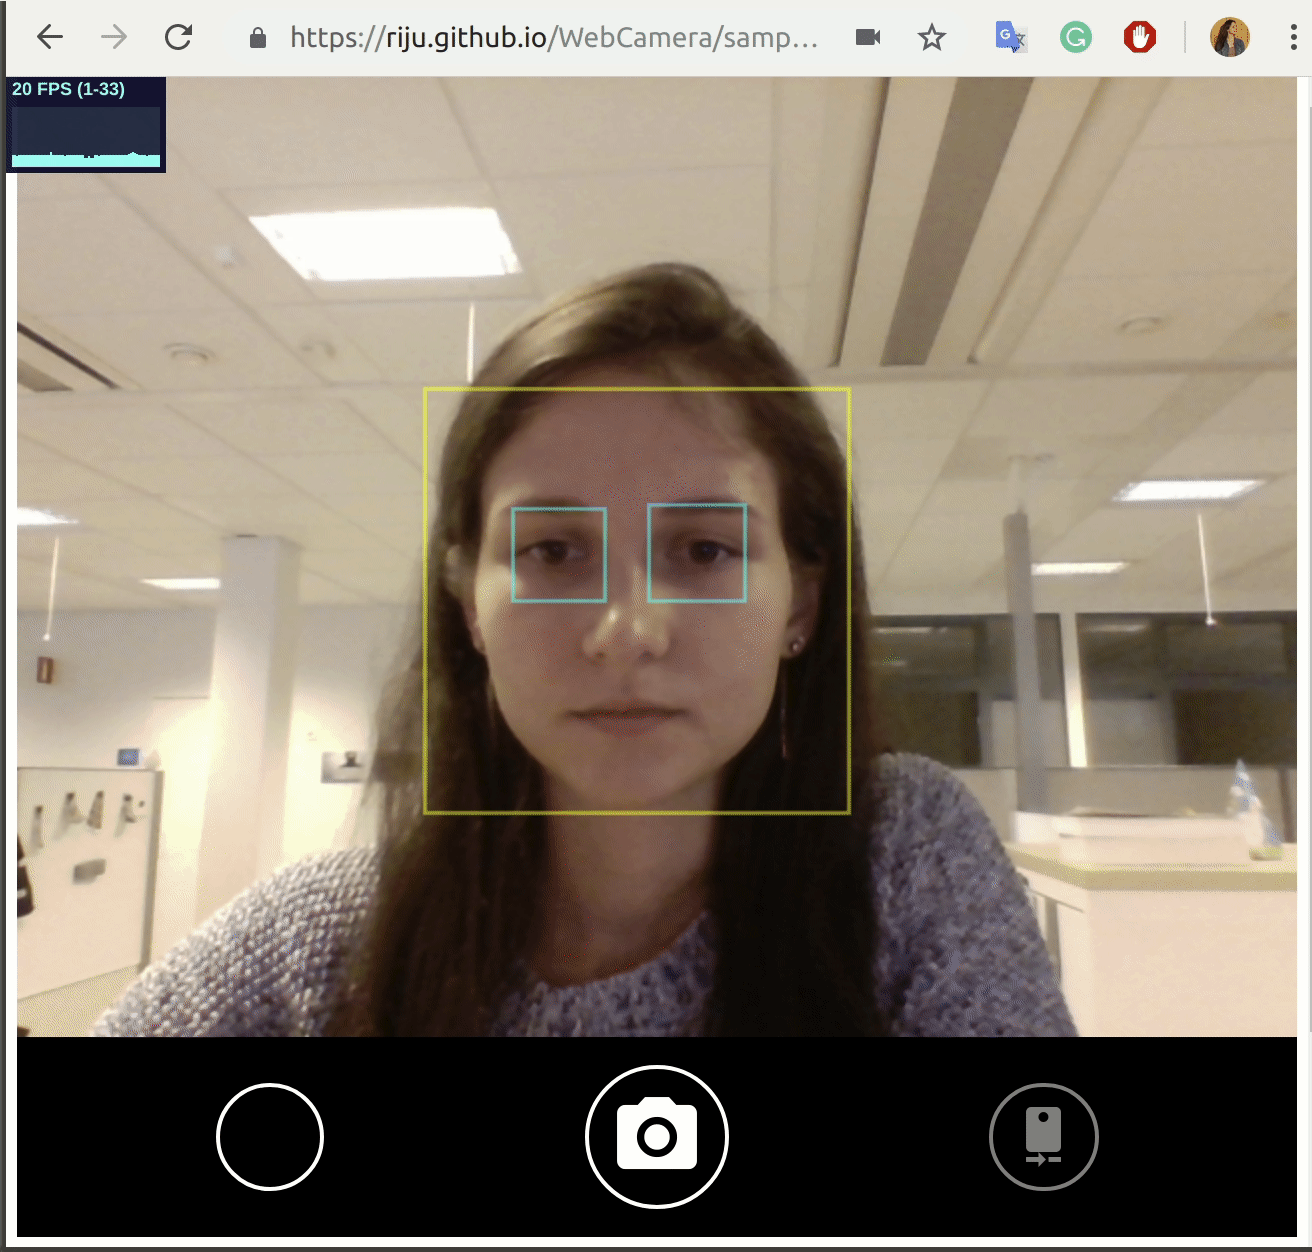 faceDetection.gif is not yet loaded